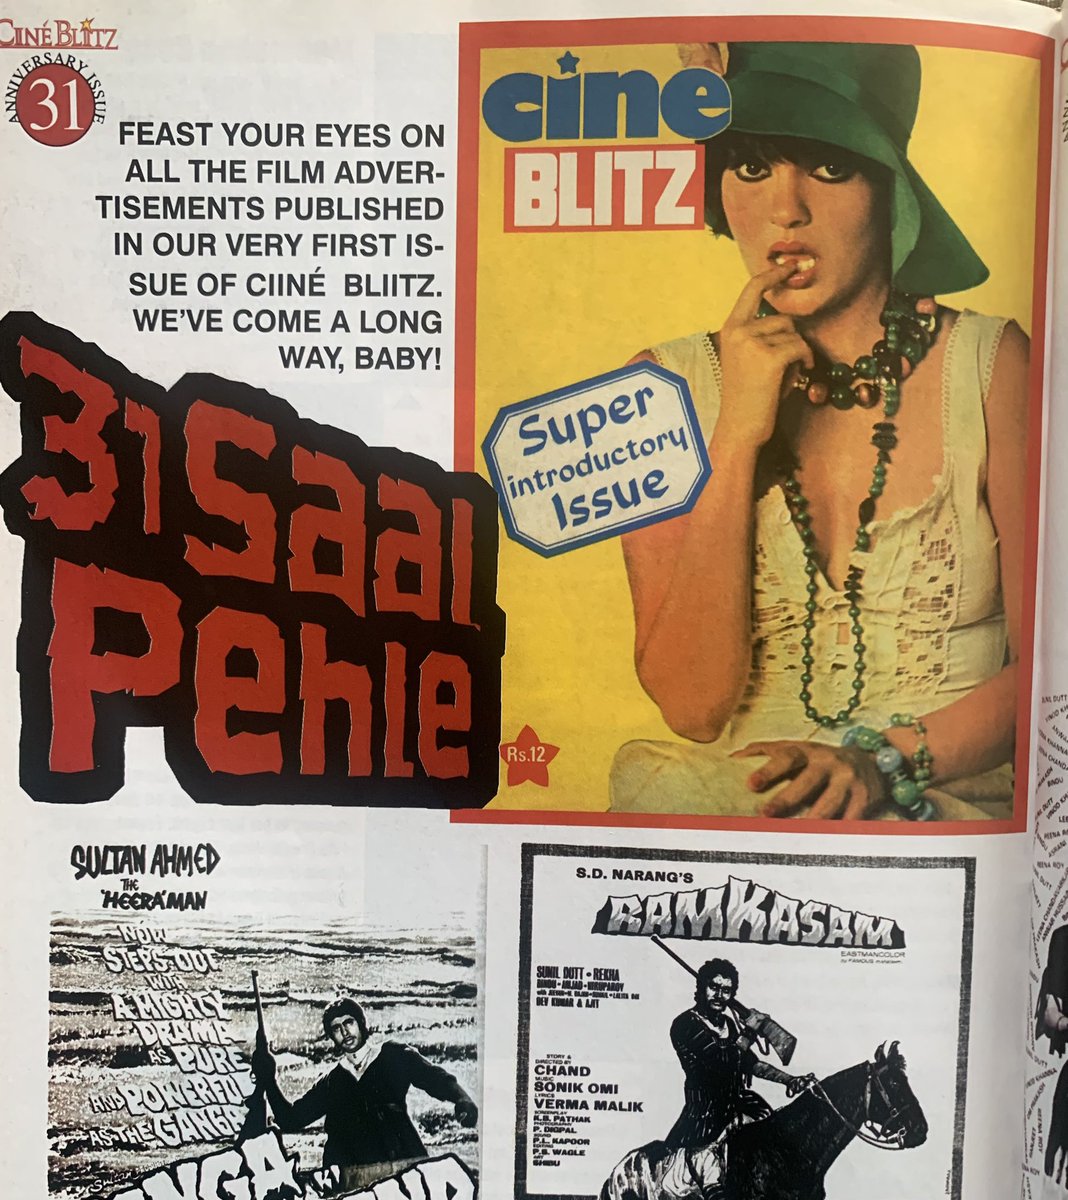 Rare film posters from the 70s in Cineblitz magazine! #AmitabhBachchan #indiancinema #bollywood #movieposter #FilmPosters 

Visit this page to see them and for more exclusive content 
facebook.com/groups/2885335…